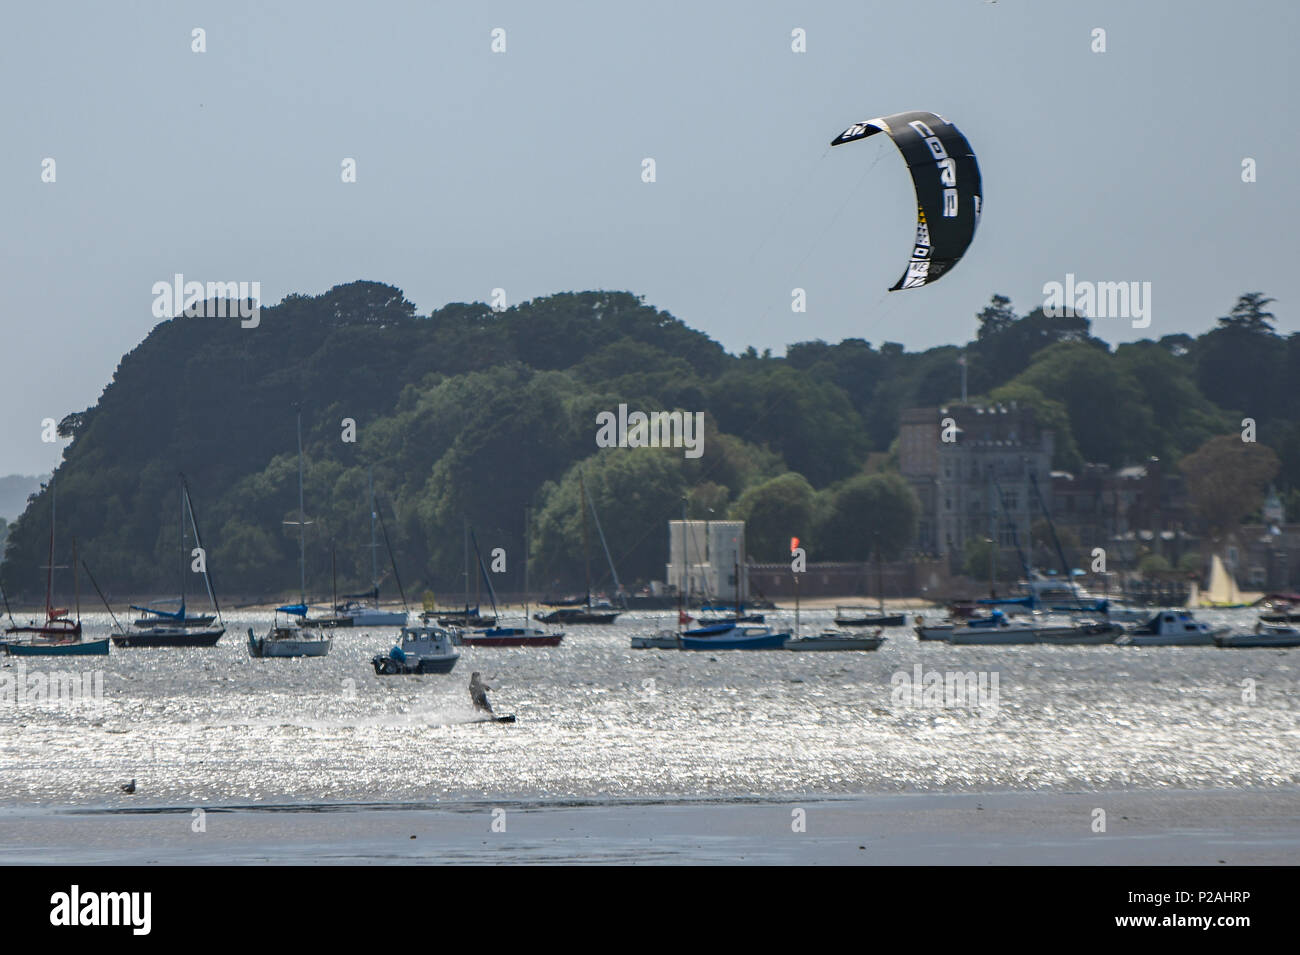 Poole, UK. 14th June, 2018. Kite surfers make the most of the windy weather in Poole Harbour. Credit Thomas Faull/Alamy Live News. Stock Photo